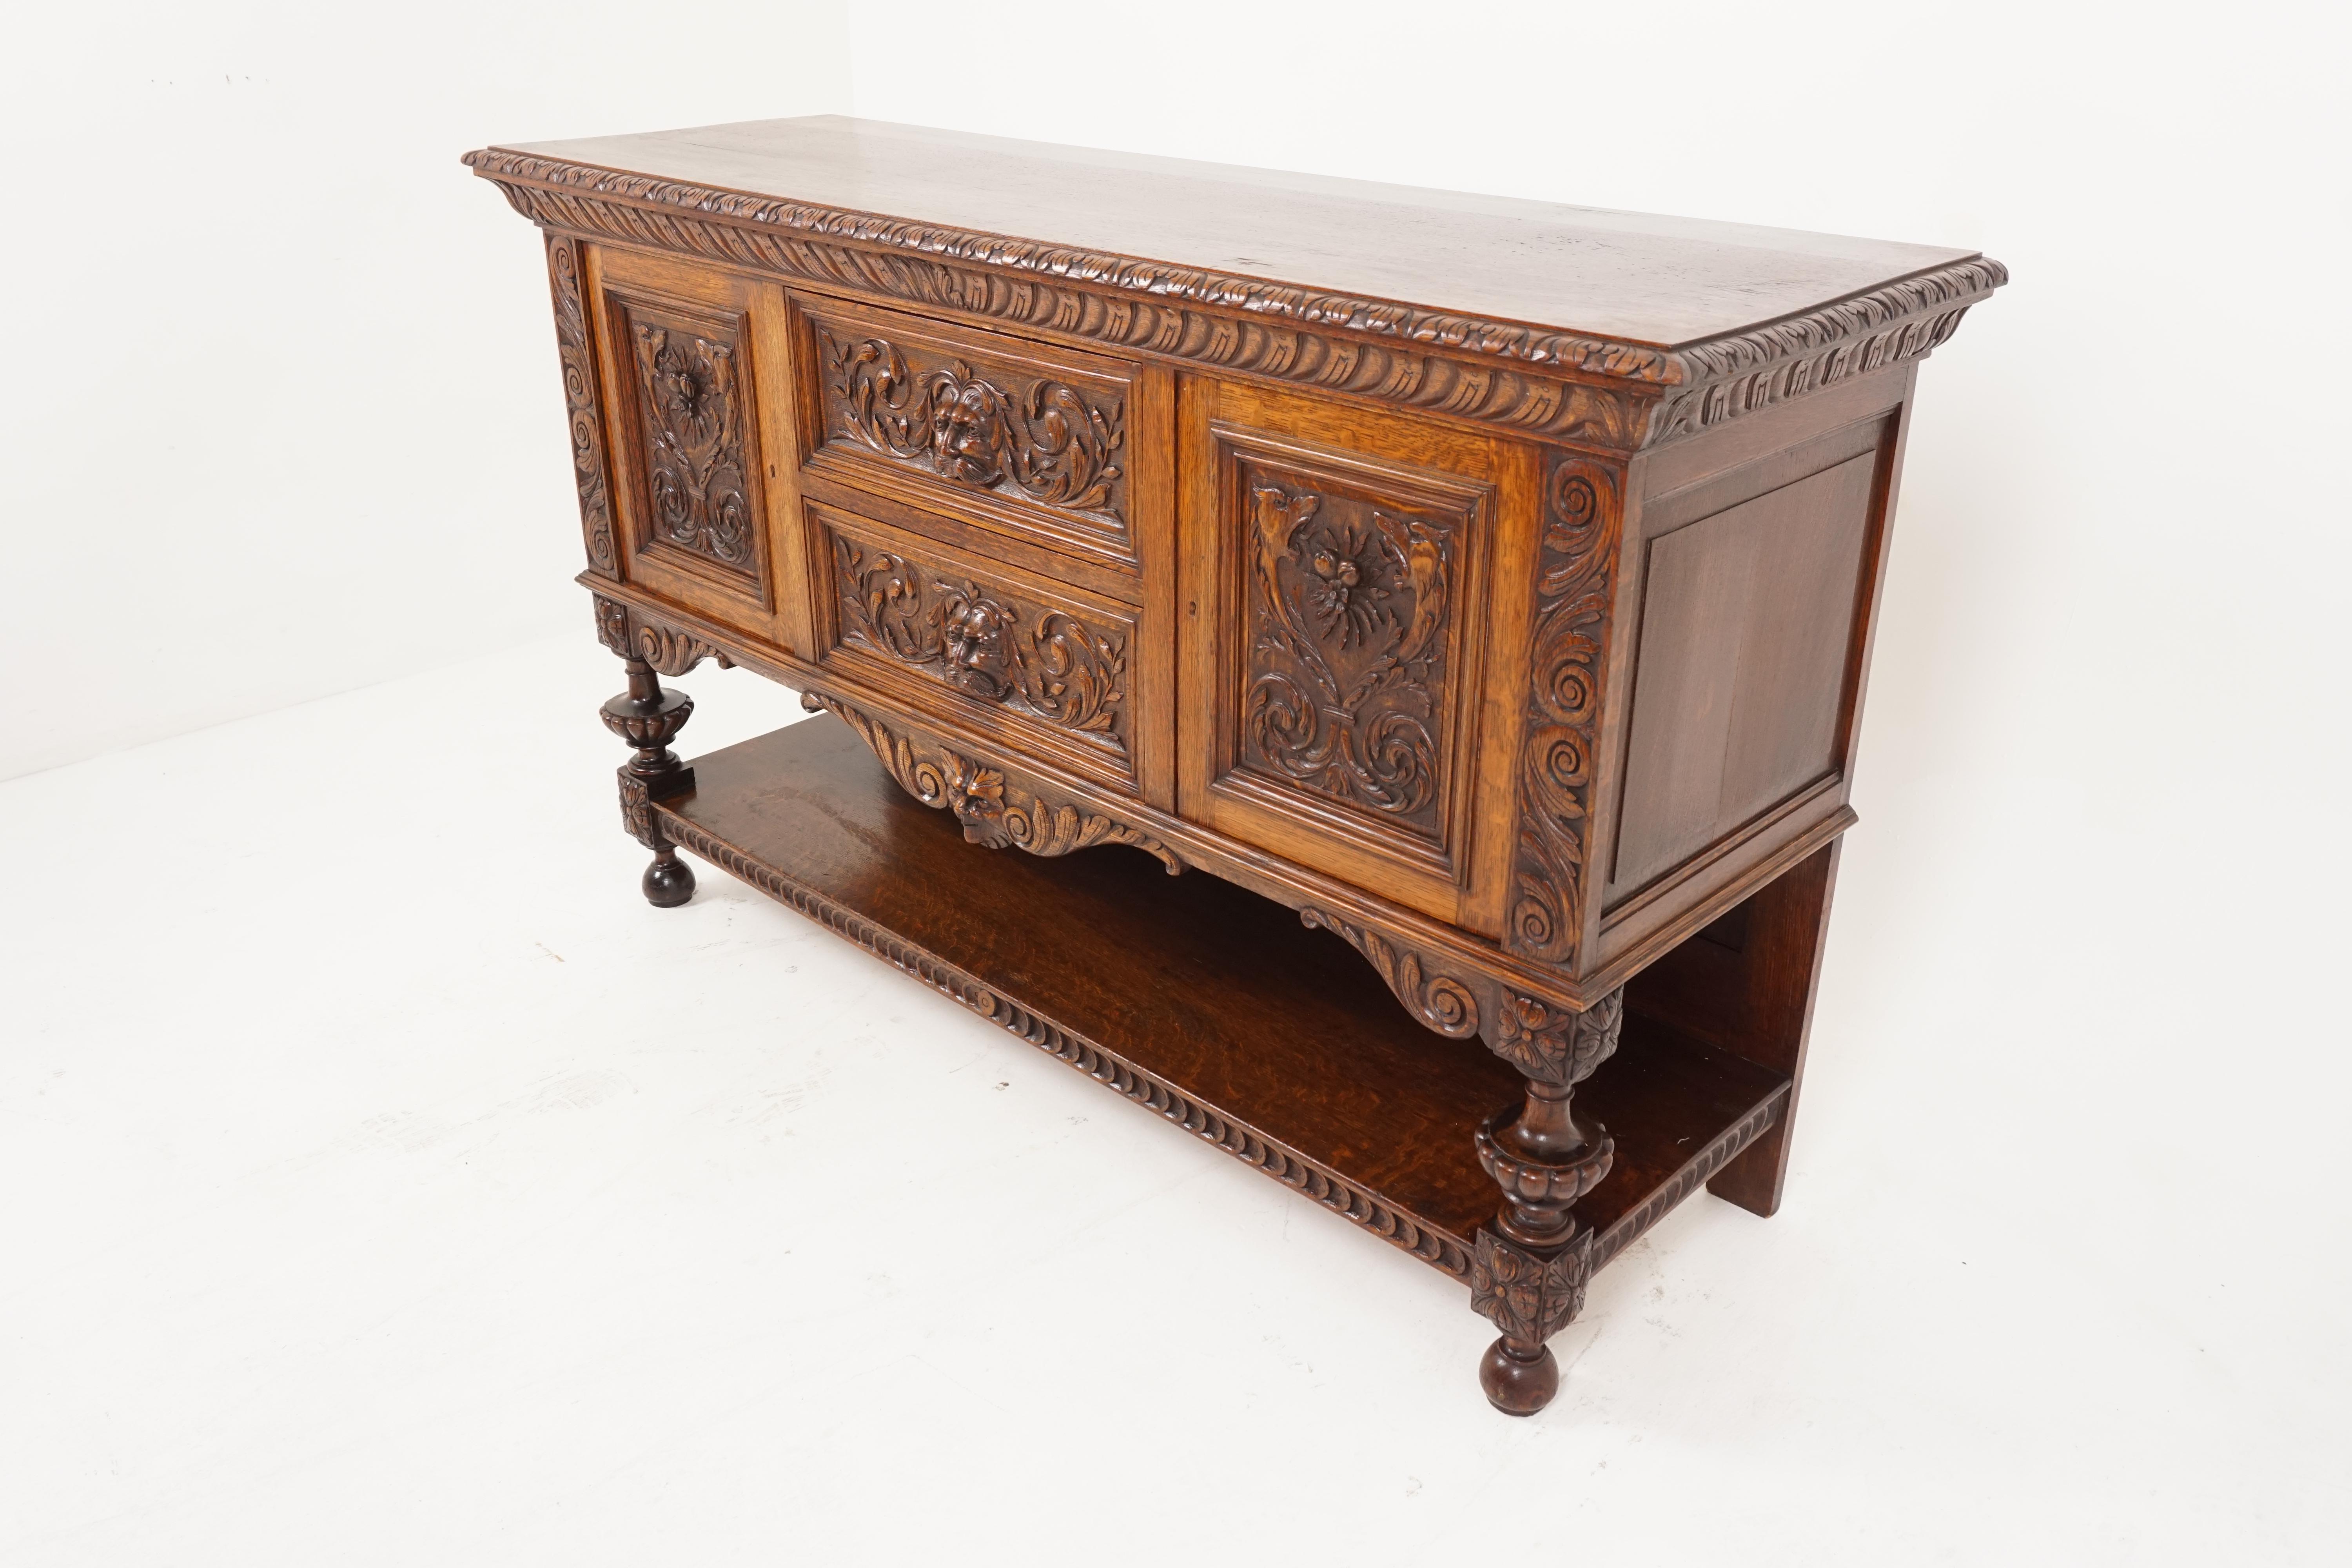 Antique Gothic sideboard, carved oak, green man buffet, Scotland 1880, B2695

Scotland 1880
Solid oak 
Original finish
Rectangular moulded top with a deep carved border
Pair of drawers with carved green man handles
Flanked by a pair of carved